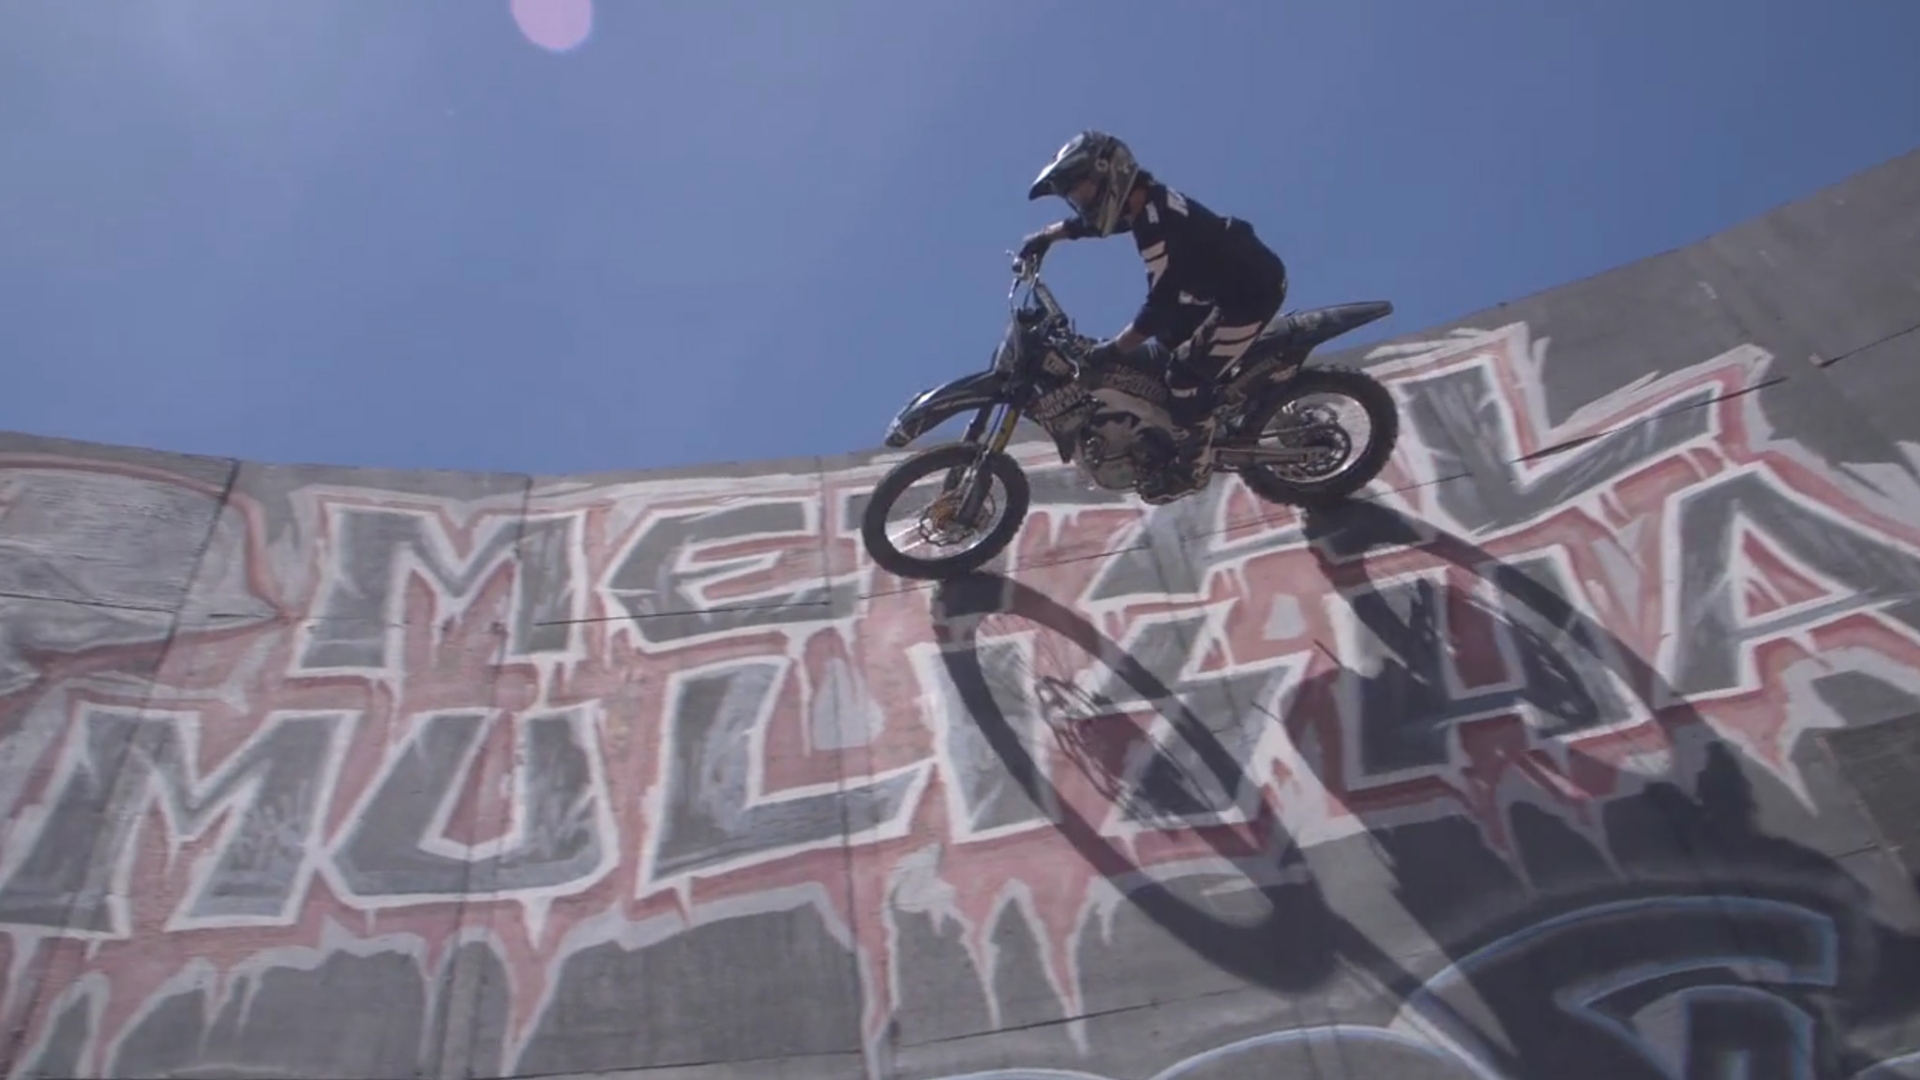 Road to X Games: Colby Raha